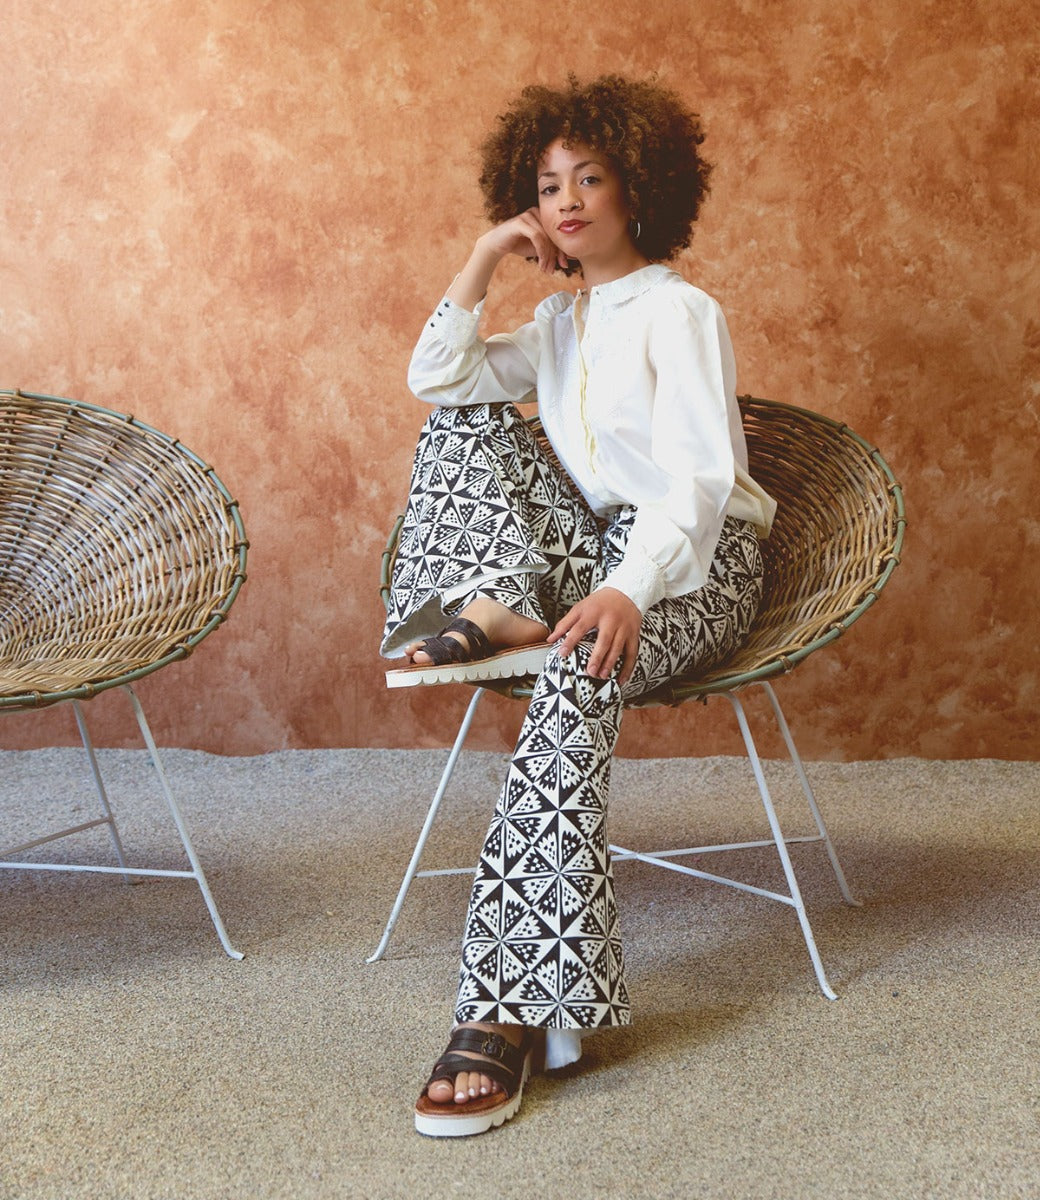 A woman sits on a chair wearing Bed Stu patterned pants and a white shirt.